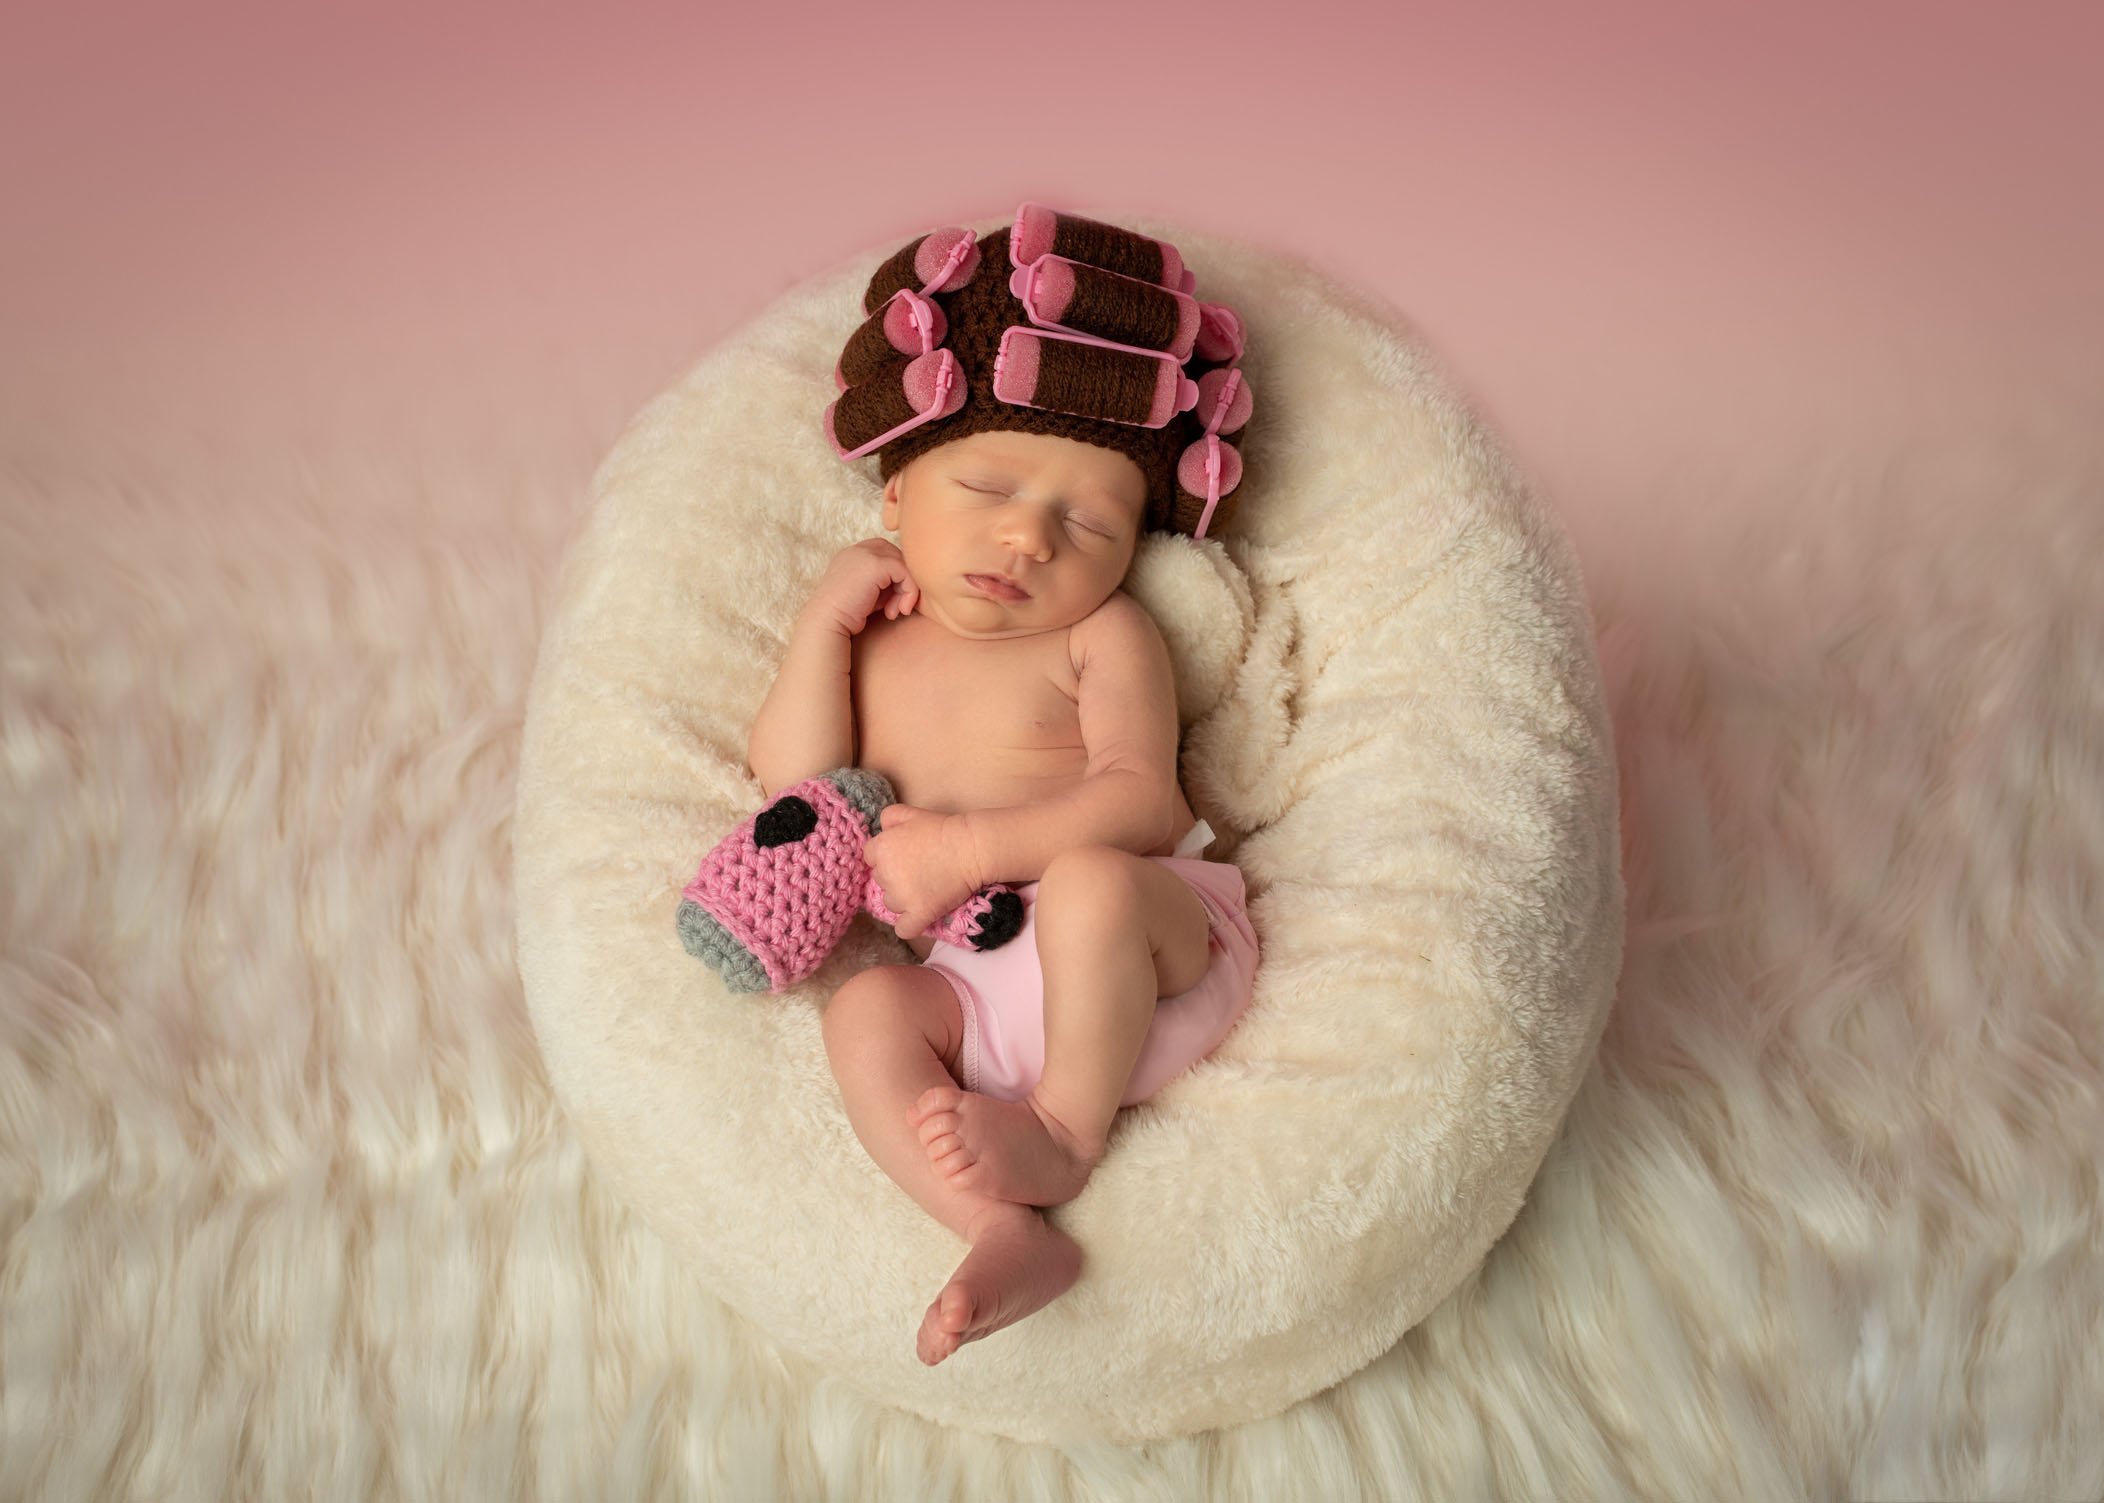 newborn baby girl wearing hair curlers and holding a crocheted hair dryer